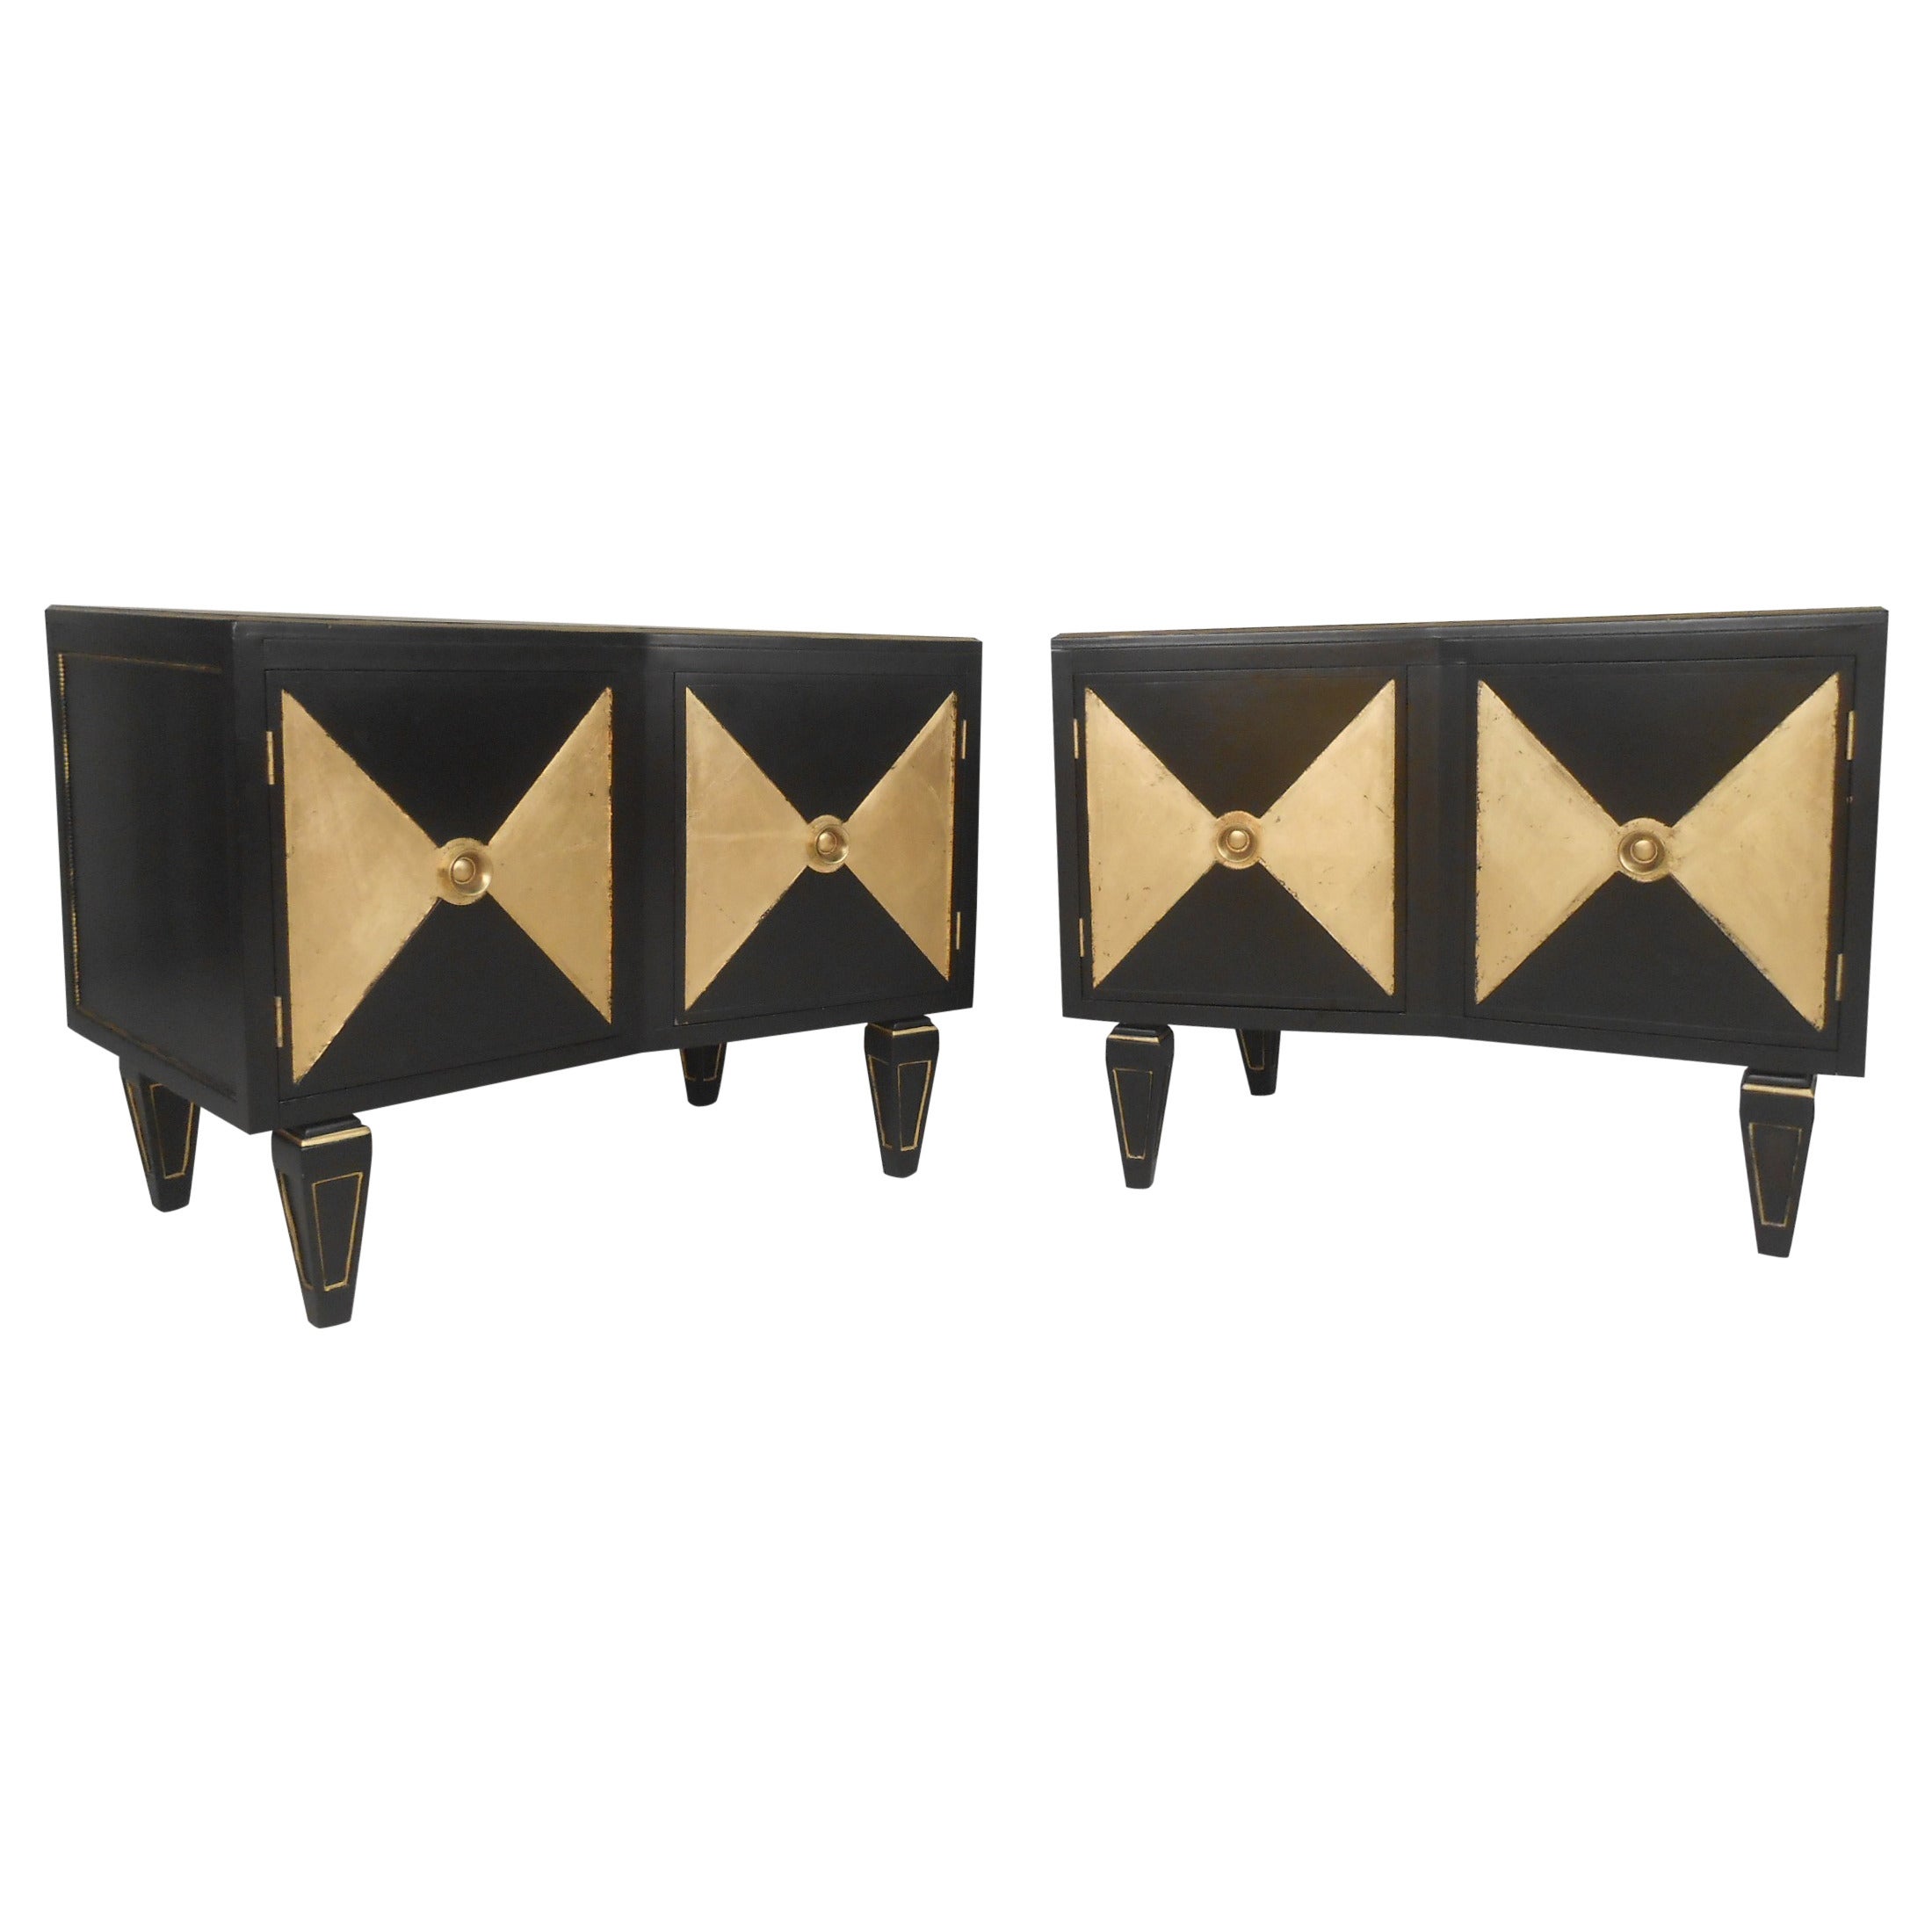 Pair of Gold and Black NightStands by David R. Harrison